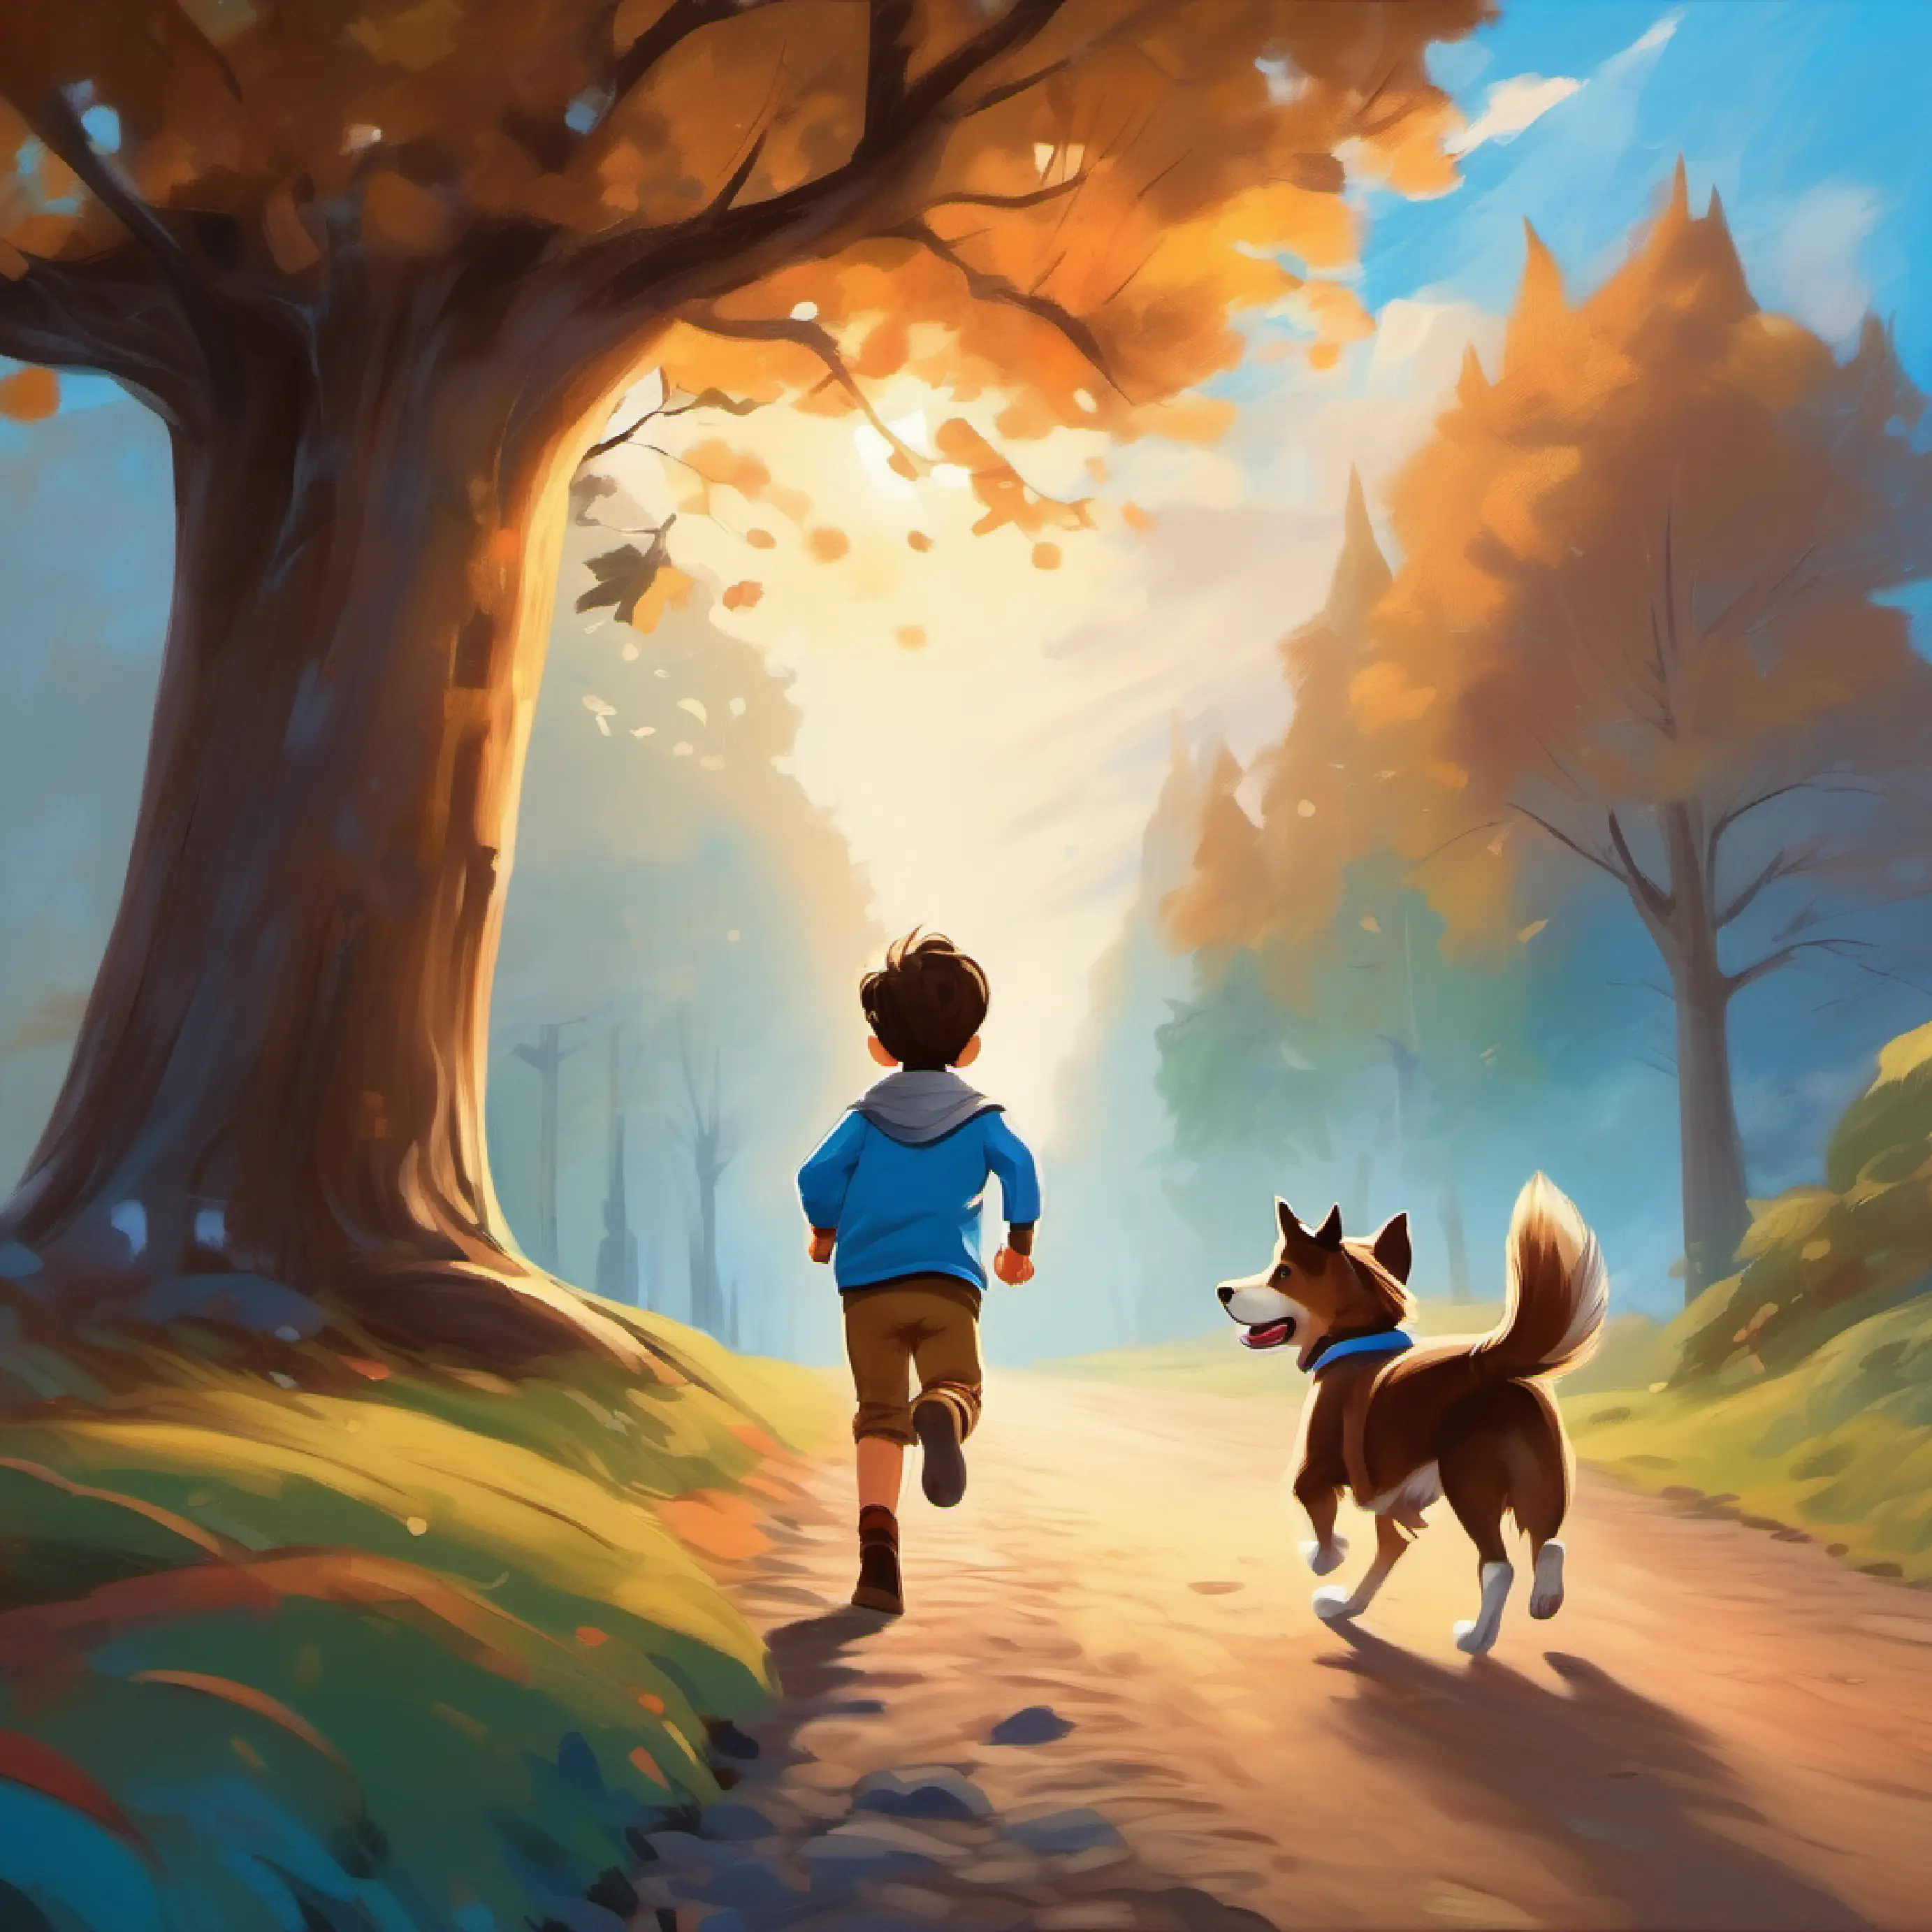 A young boy with brown hair and blue eyes notices a large tree, A small, playful dog with brown fur excitedly runs towards it.